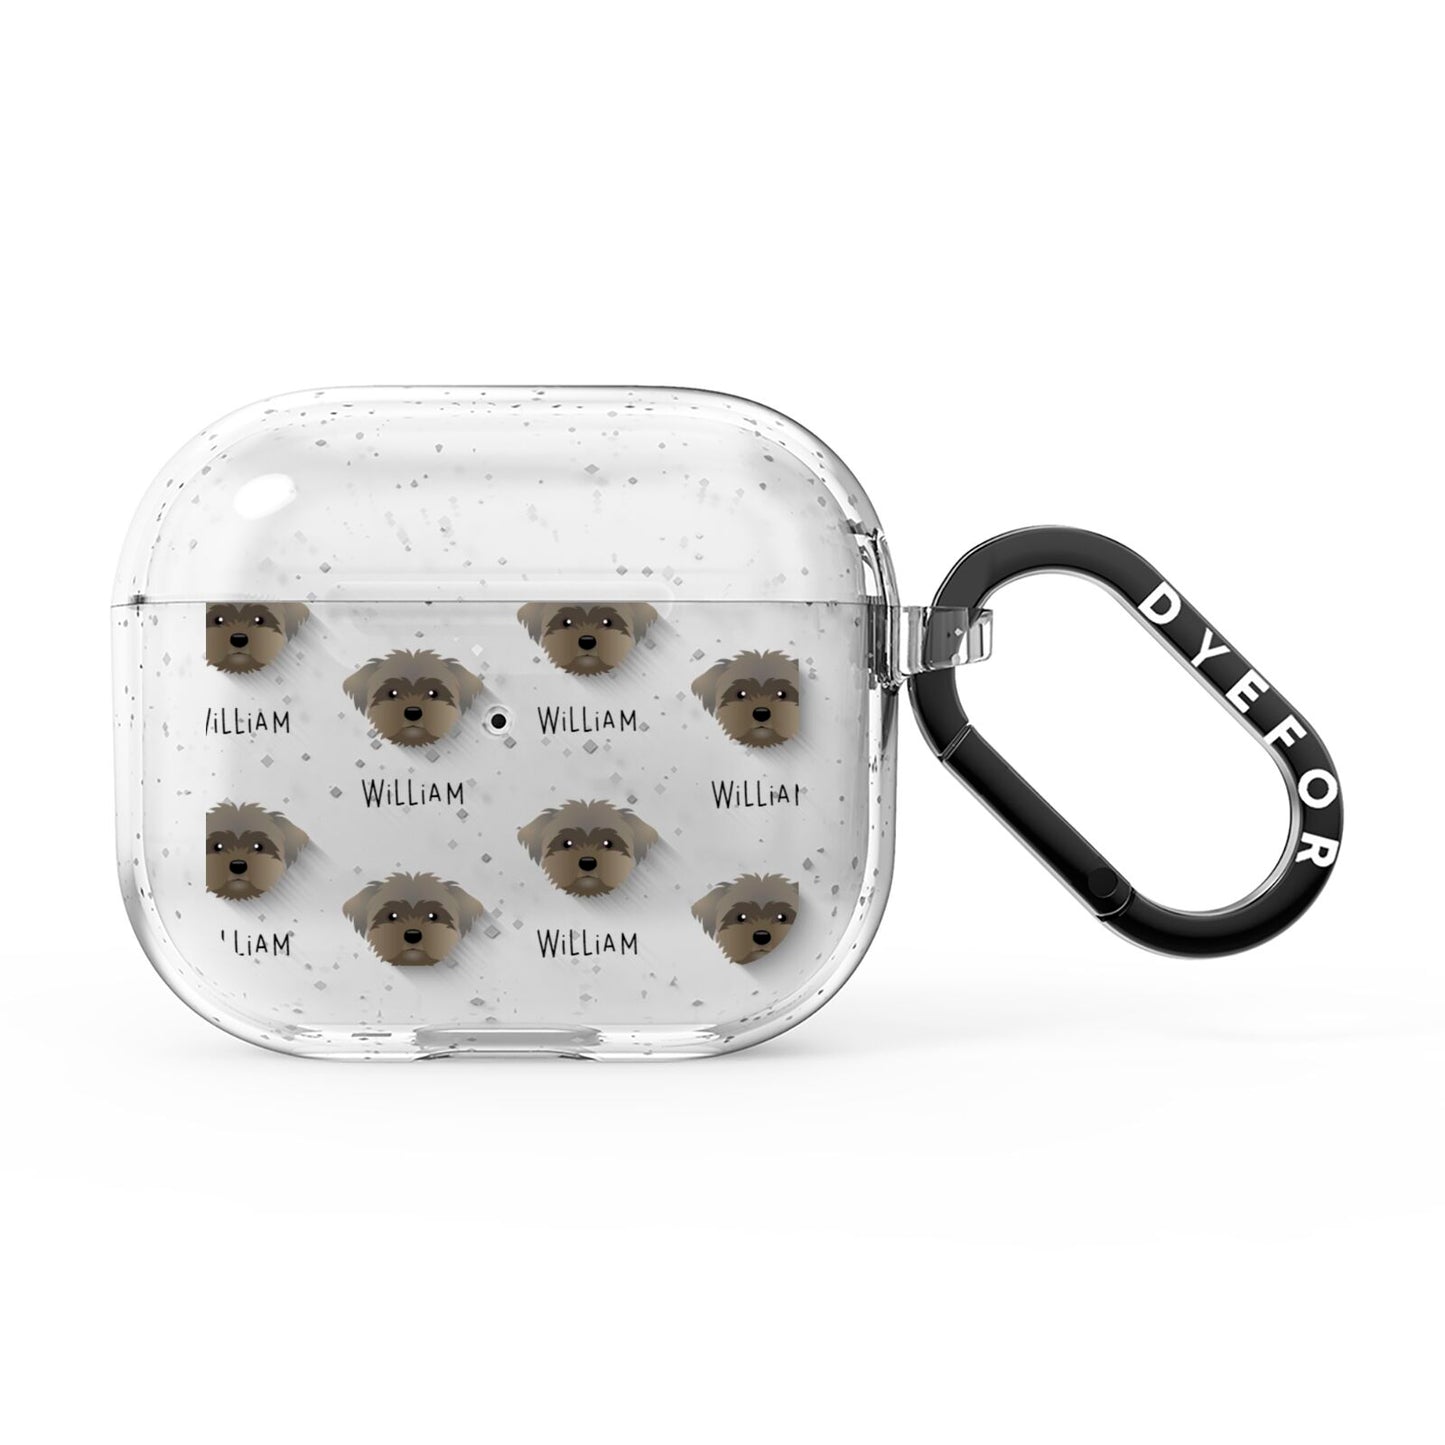 Peek a poo Icon with Name AirPods Glitter Case 3rd Gen